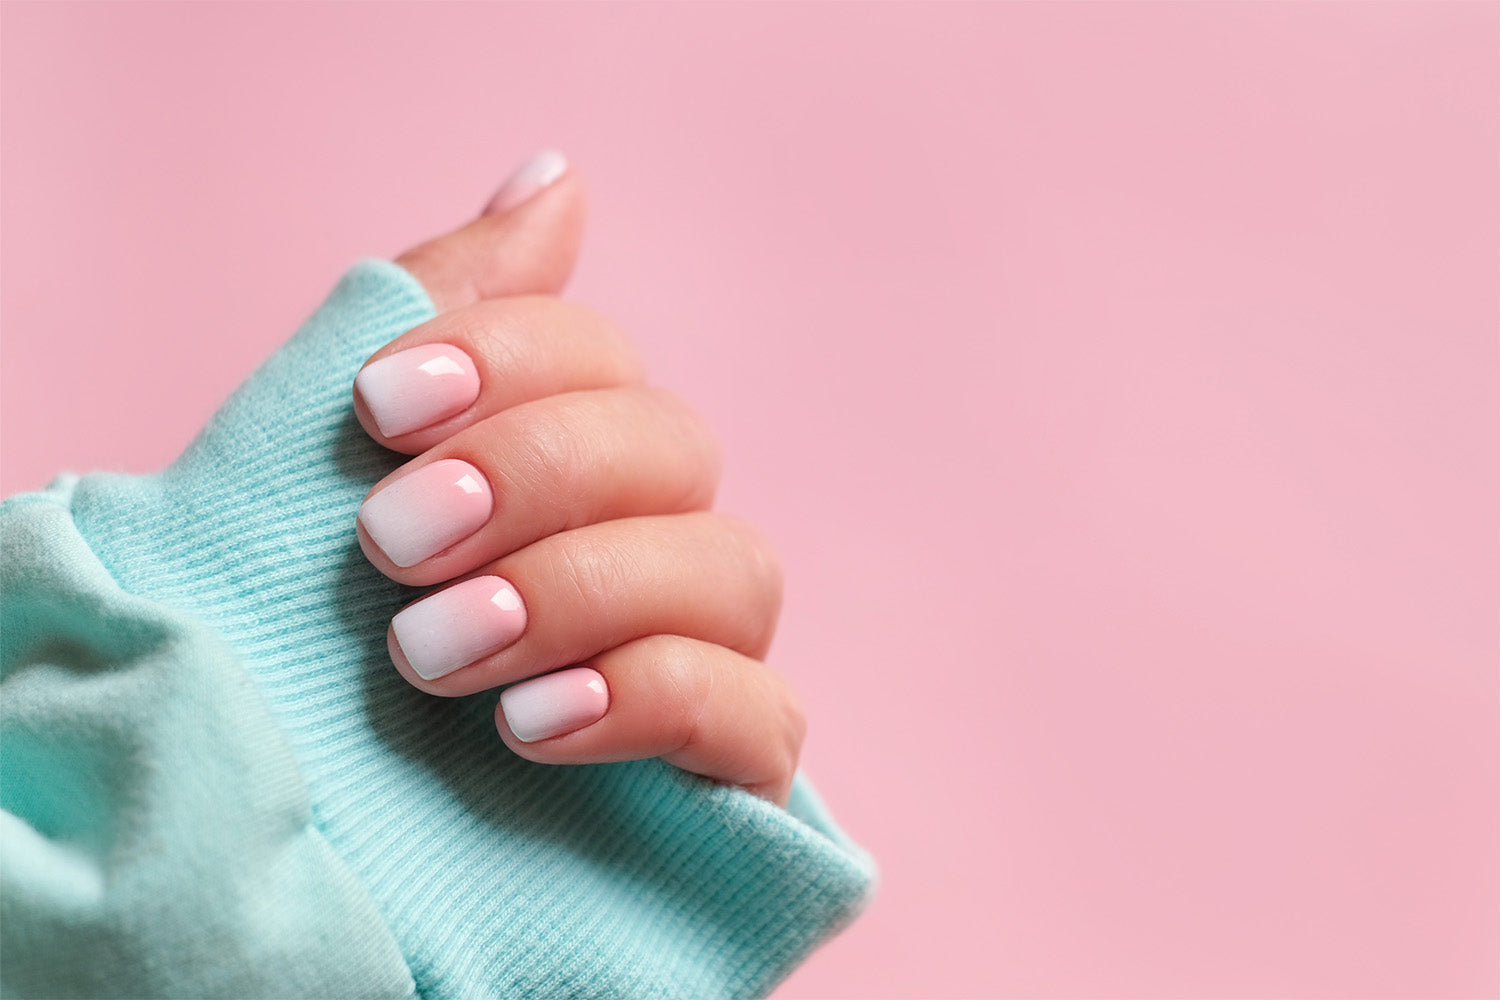 How To Strengthen Your Nails: 9 Tips